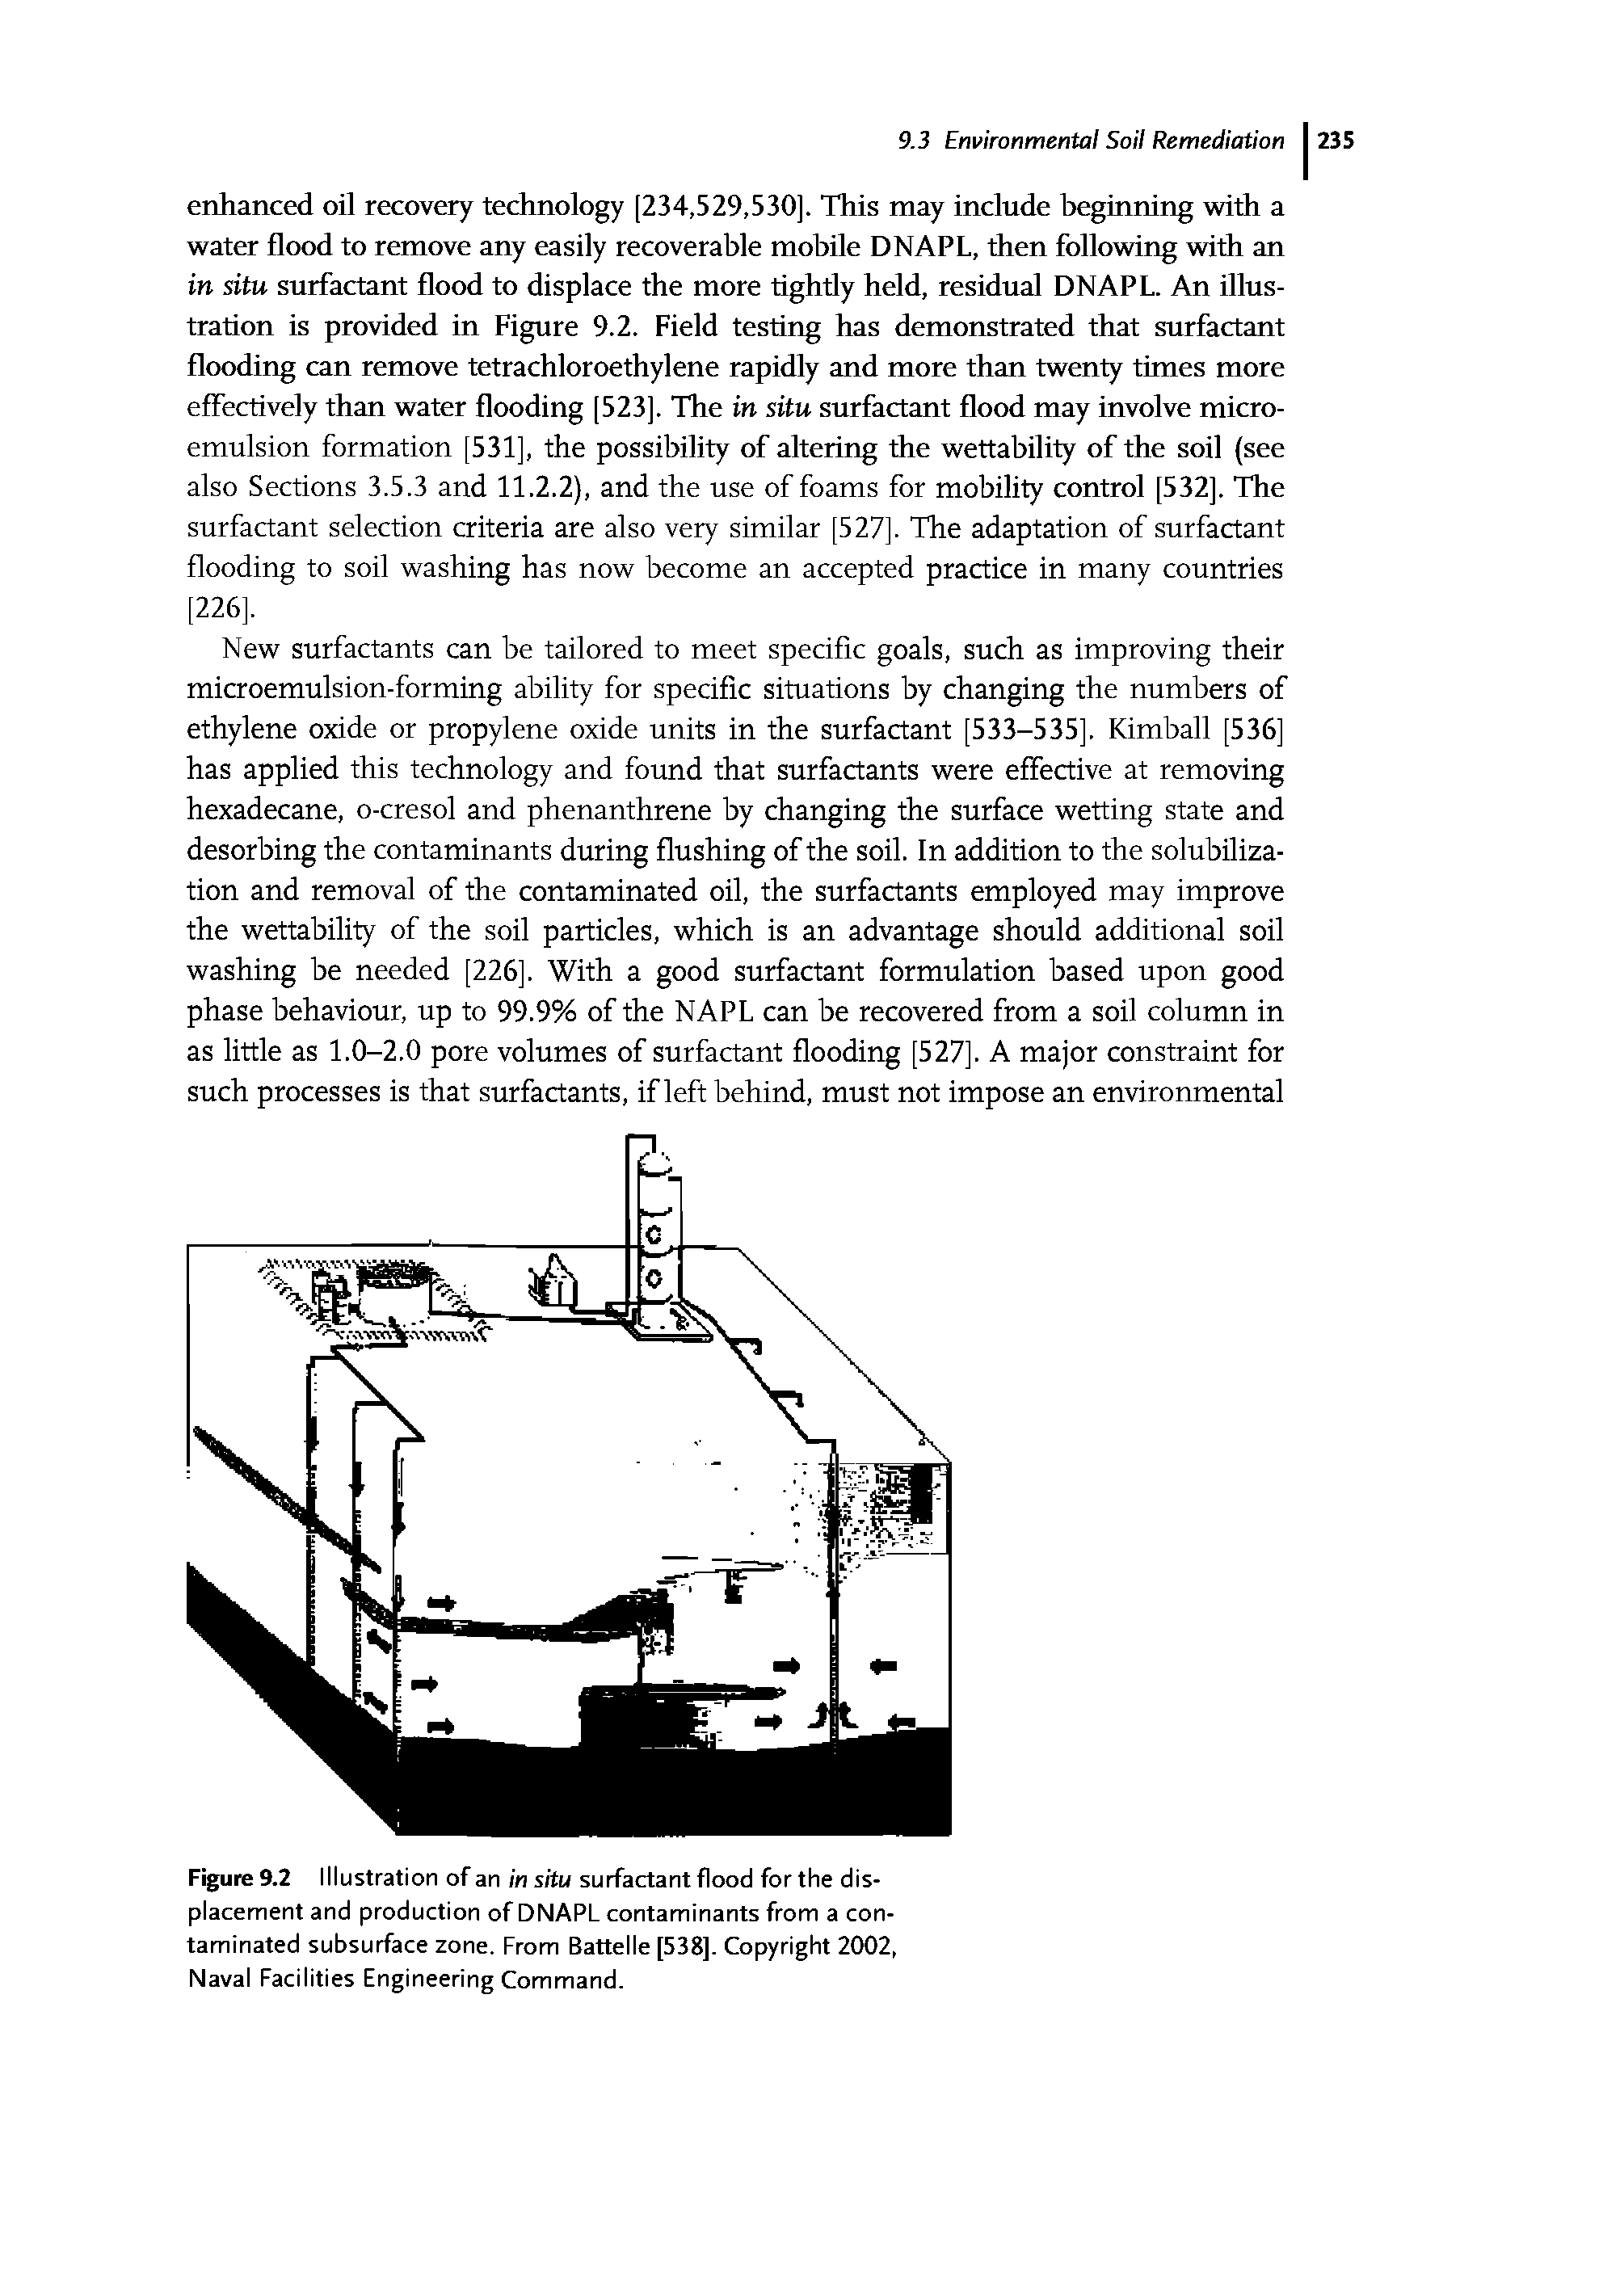 Figure 9.2 Illustration of an in situ surfactant flood for the displacement and production of DNAPL contaminants from a contaminated subsurface zone. From Battelle [538], Copyright 2002, Naval Facilities Engineering Command.